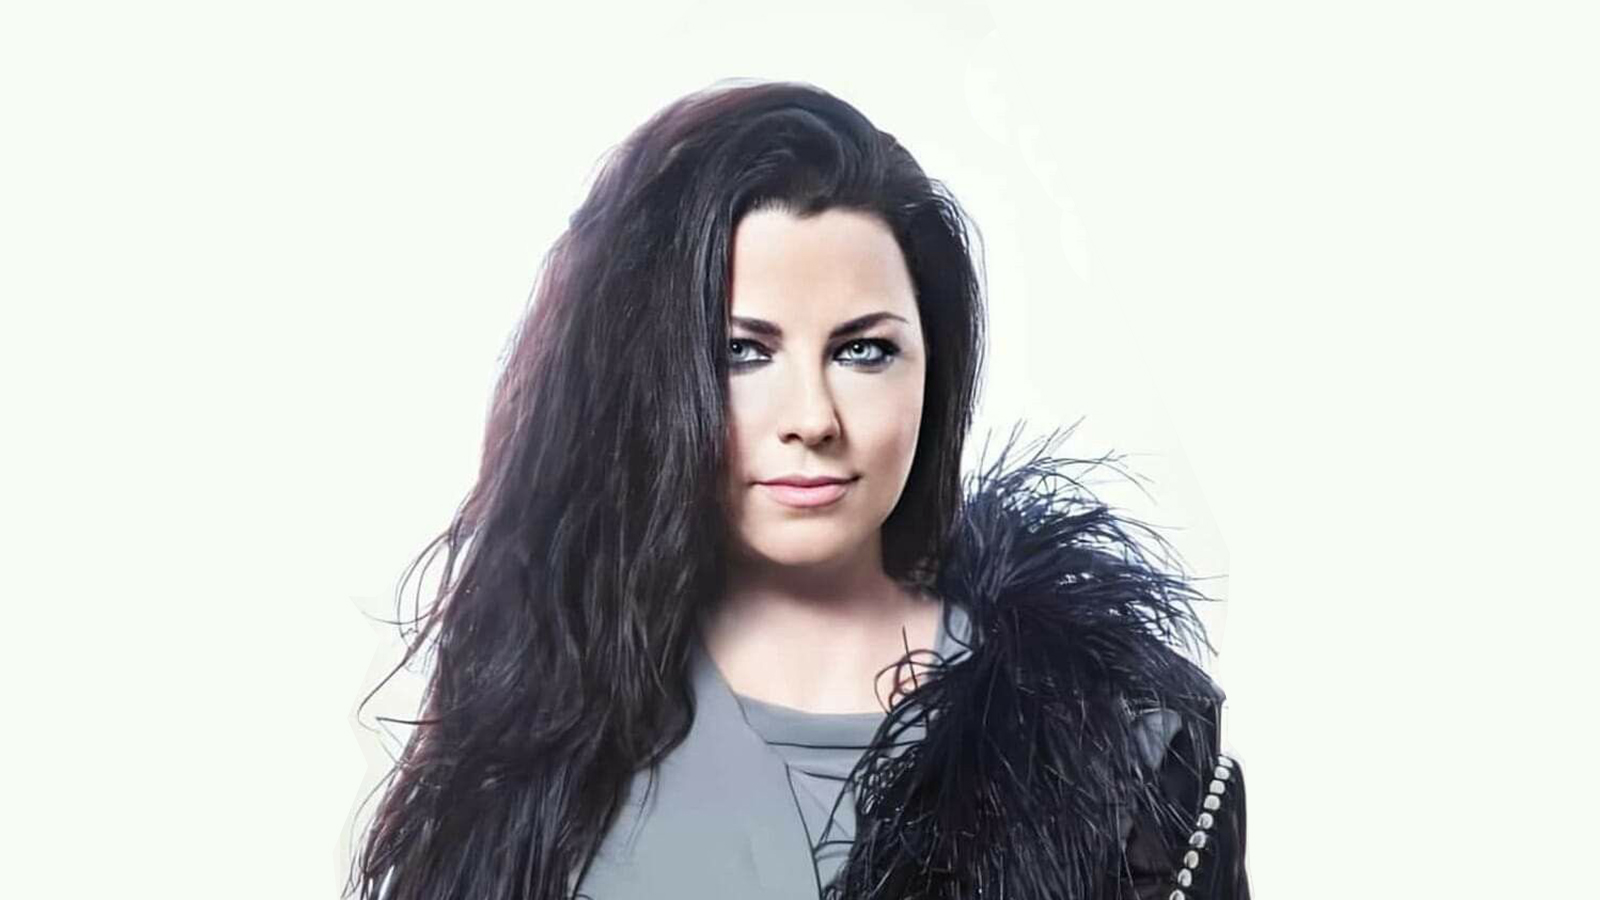 Evanescence's Amy Lee on Speaking Out, Facing Tragedy, Letting 